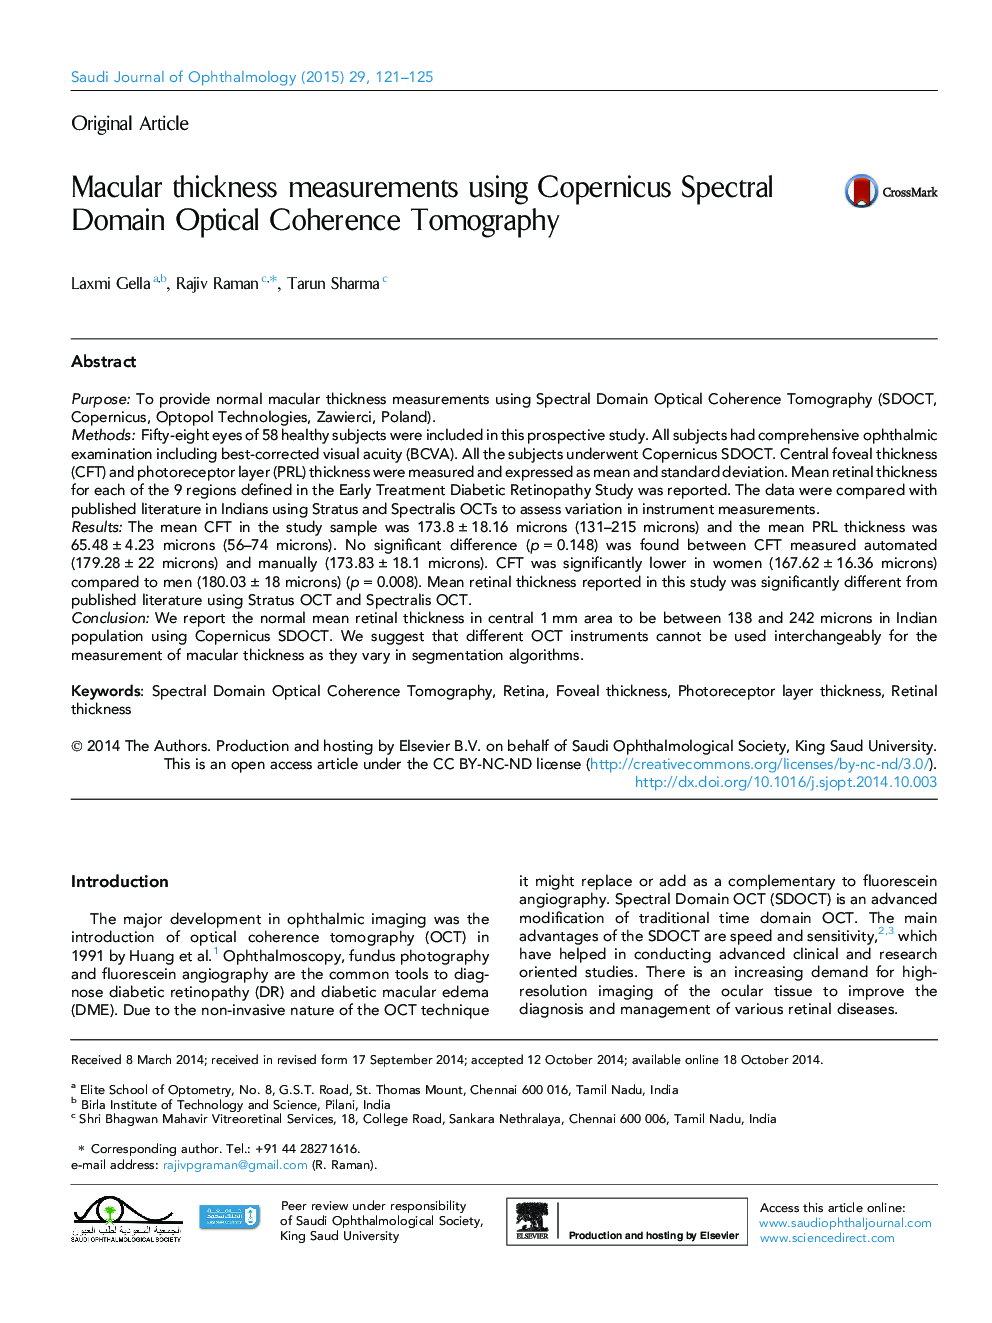 Macular thickness measurements using Copernicus Spectral Domain Optical Coherence Tomography 